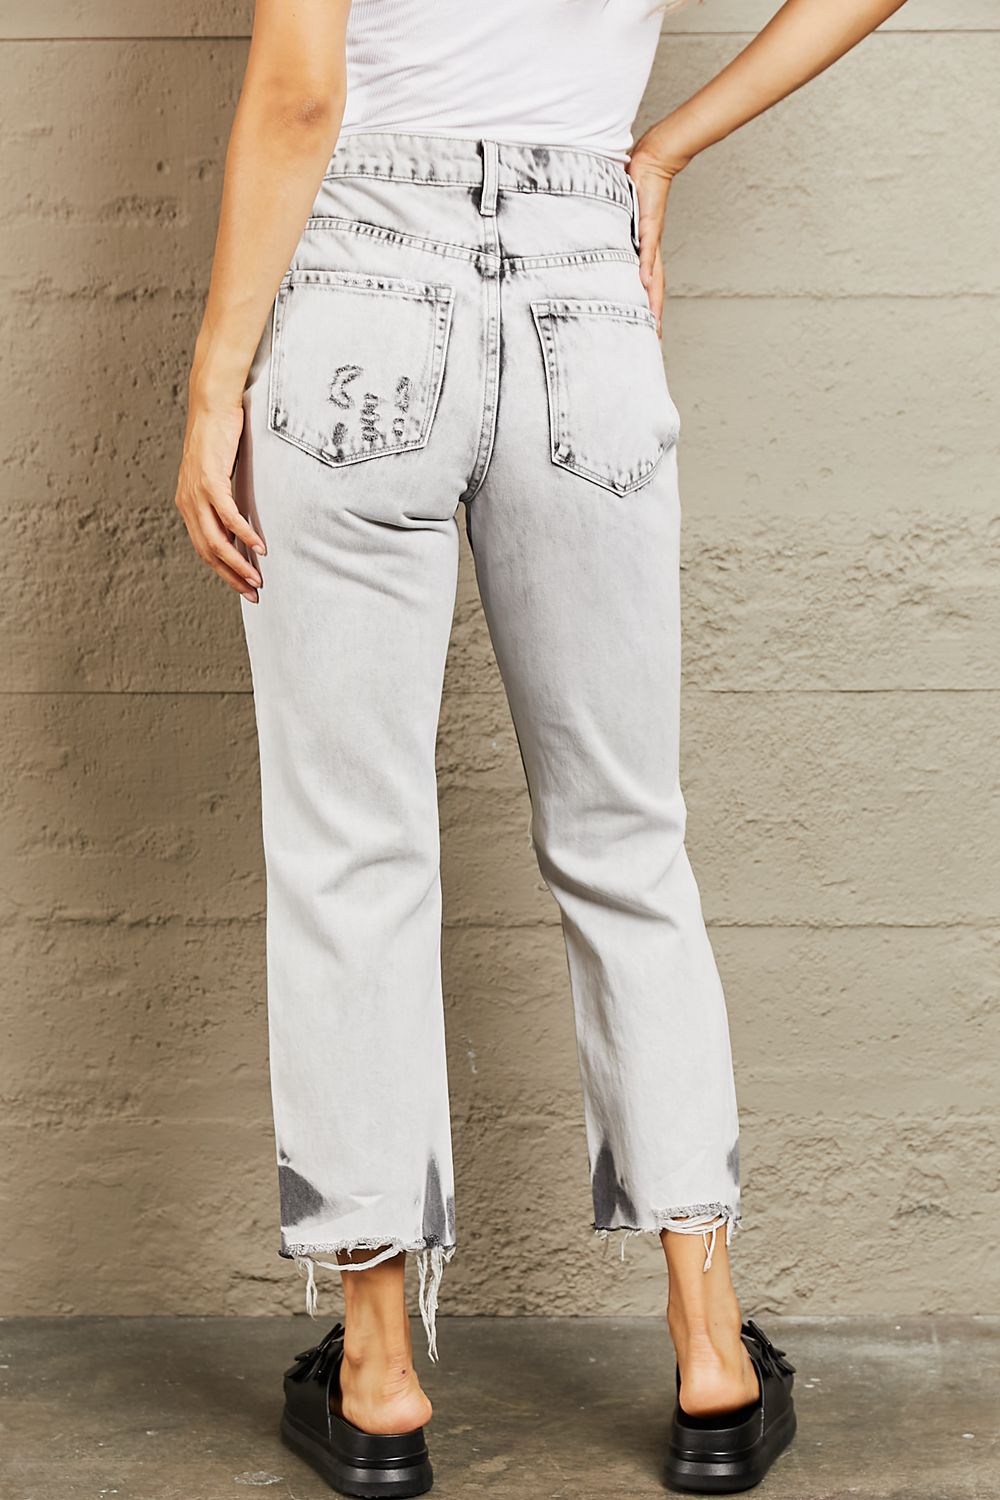 BAYEAS Acid Wash Accent Cropped Mom Jeans - nailedmoms